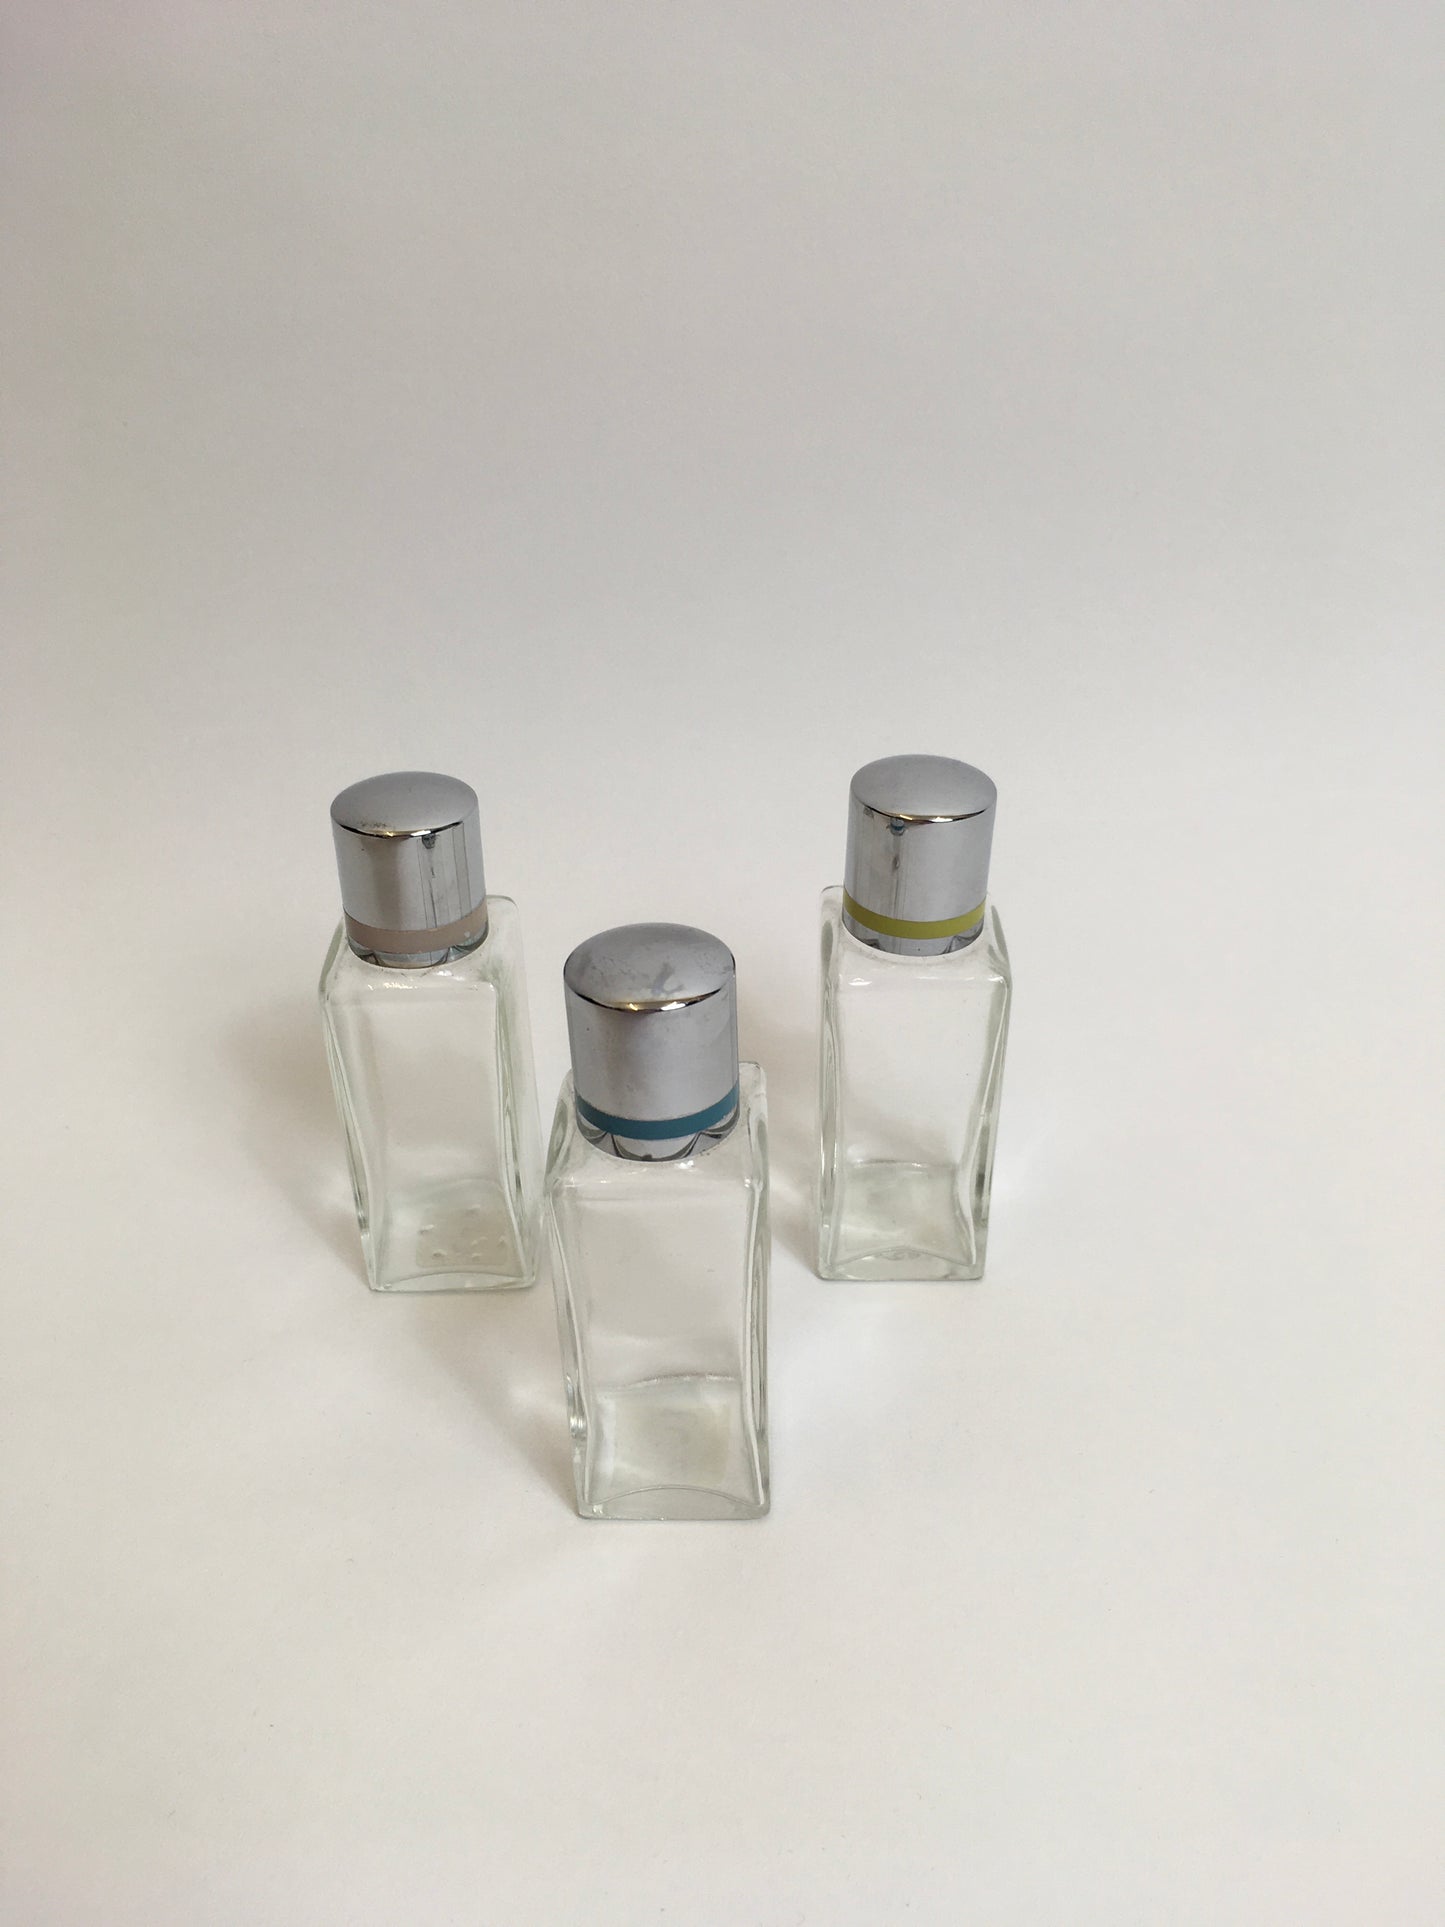 Original late 1930’s early 1940’s set of 3 Vanity Bottles - Great for the Dressing Table